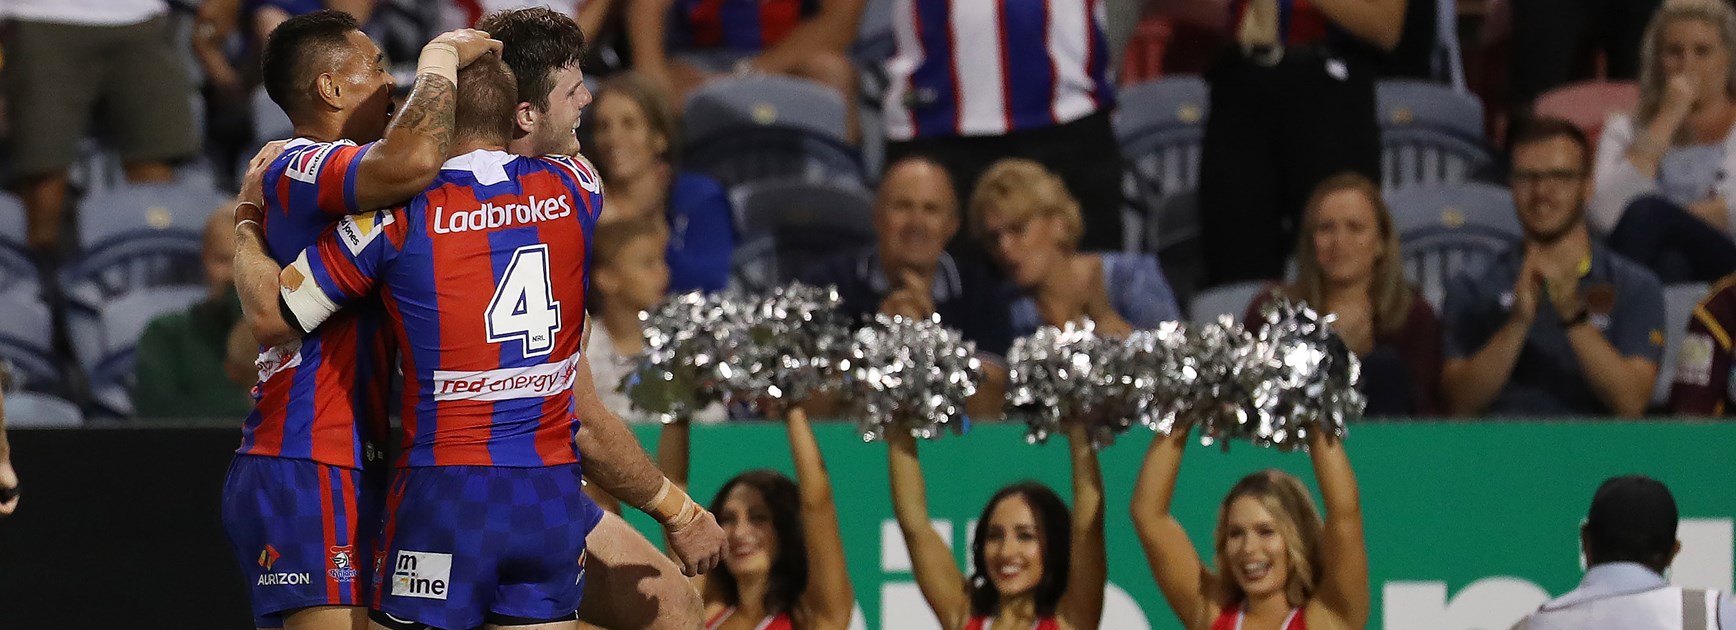 The Newcastle Knights celebrate a try.